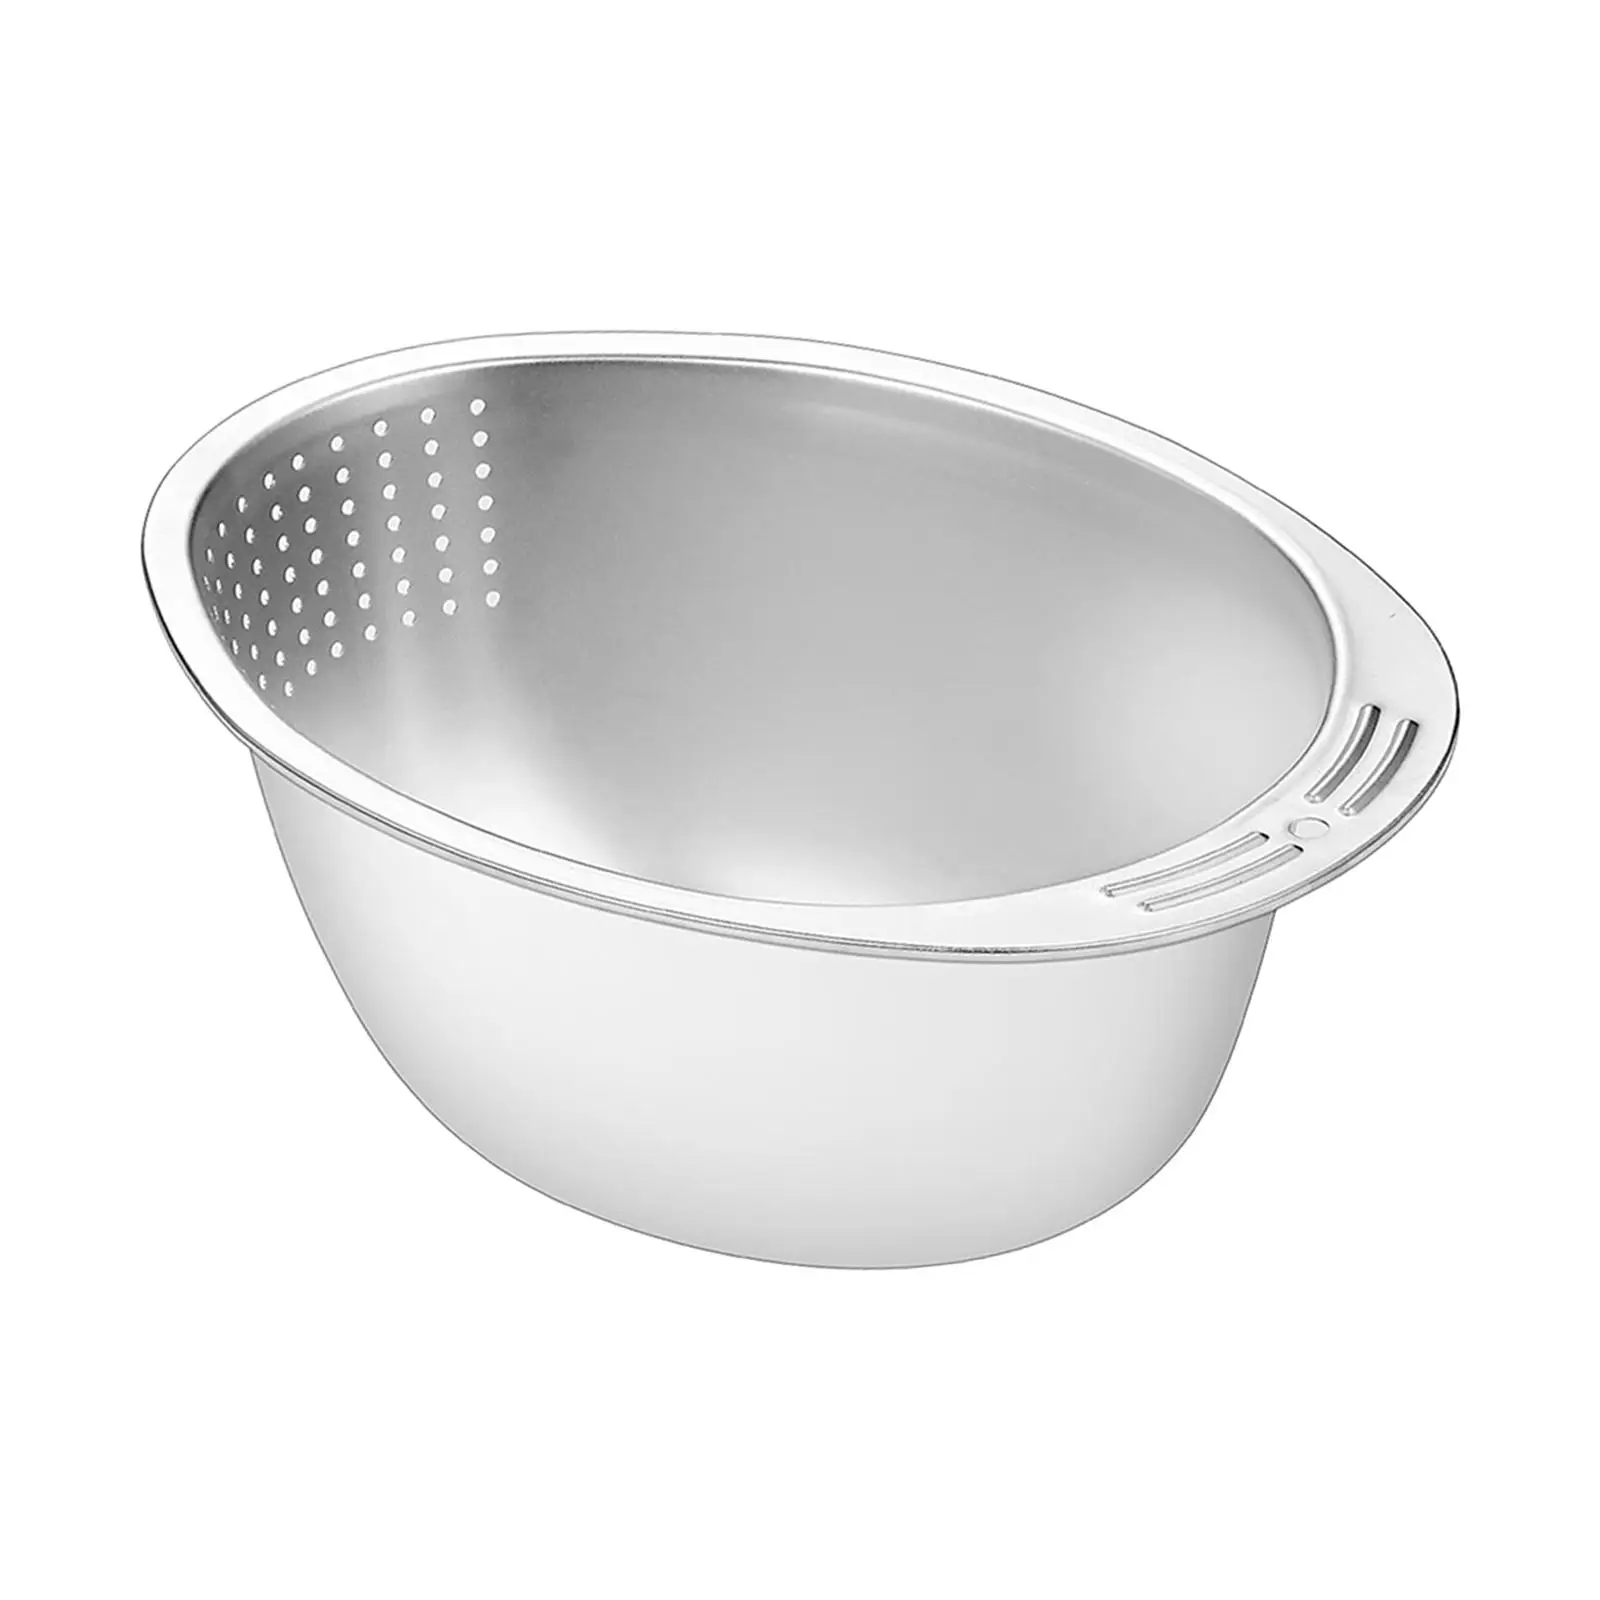 Household Grain Washer Strainer Kitchen Gadgets Multipurpose Rice Washing Filter Strainer Basket for Rice Beans Grapes Peas